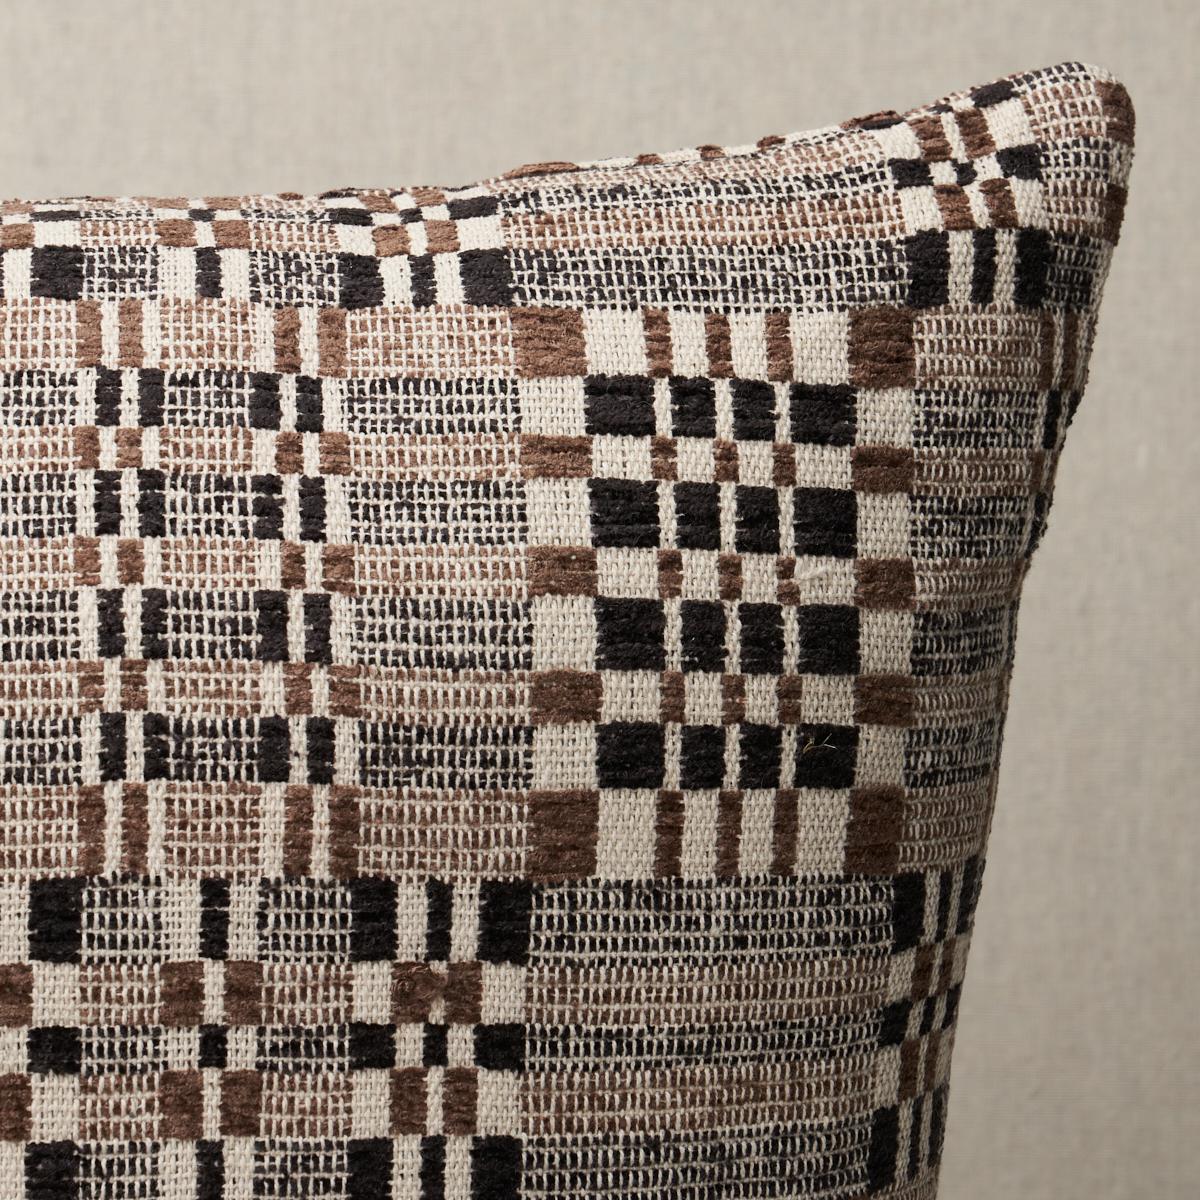 This pillow features Brimfield with a knife edge finish. Inspired by a vintage textile we found at the famed Brimfield Antique Flea Market, this exceedingly soft and intricate woven has an authenticity to boot. Pillow includes a feather/down fill